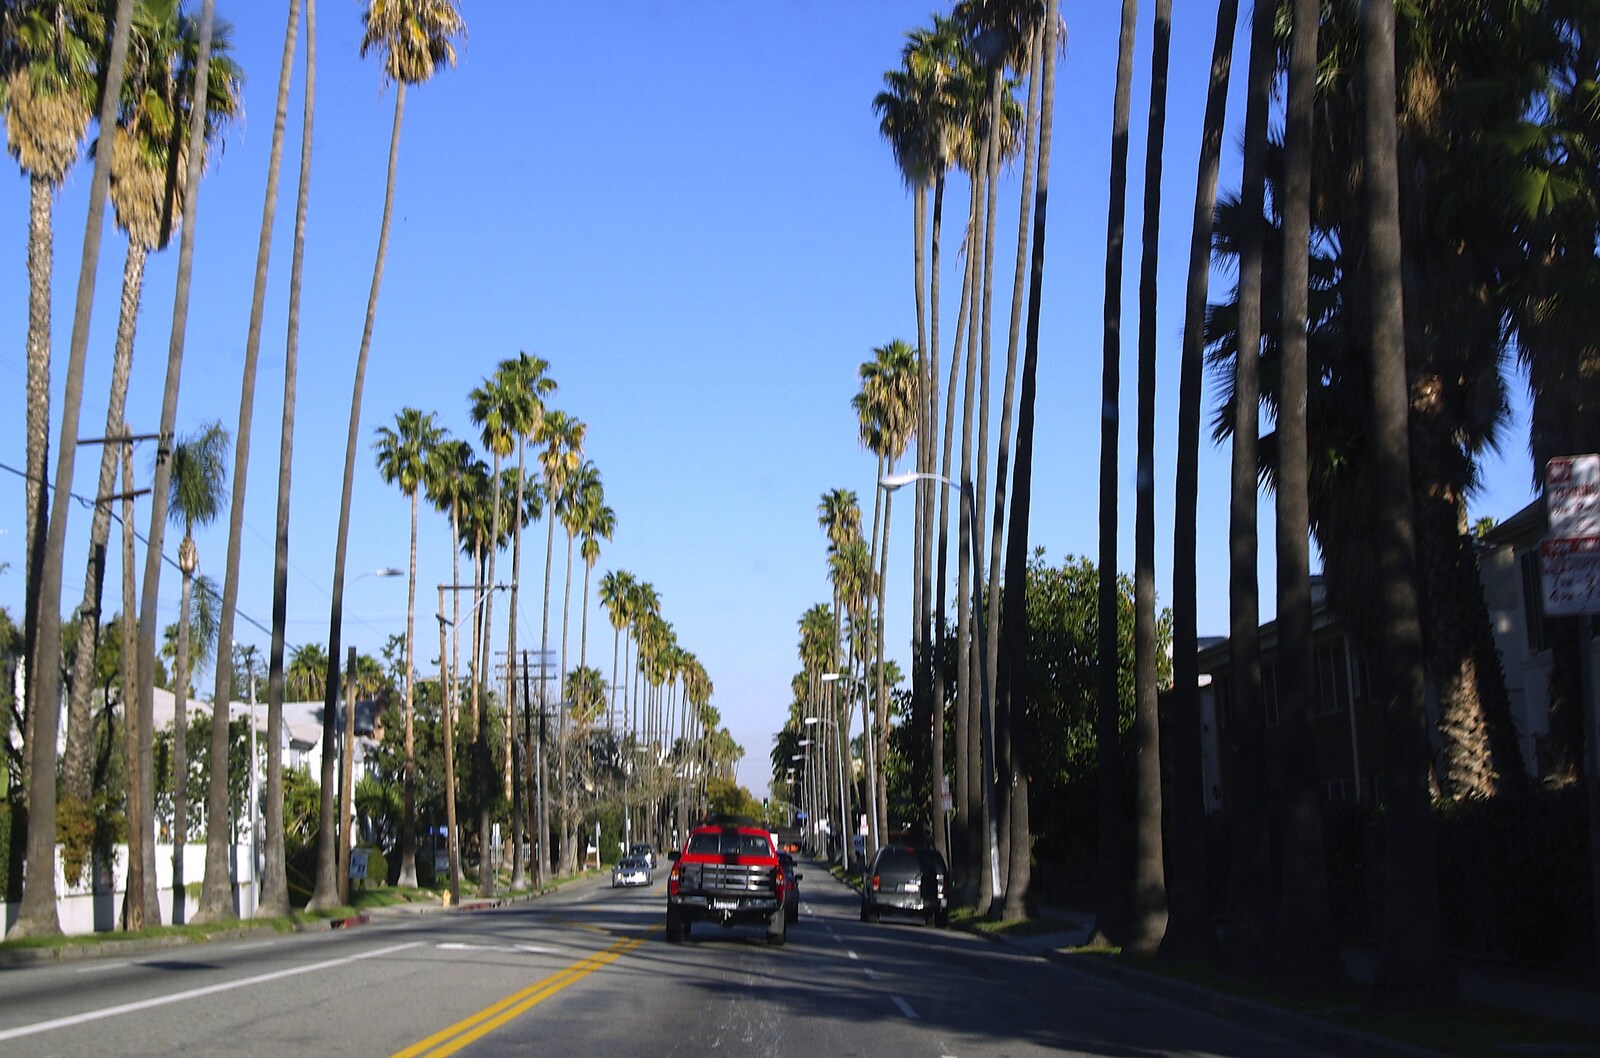 San Diego and Hollywood, California, US - 3rd March 2008: Tall palm trees